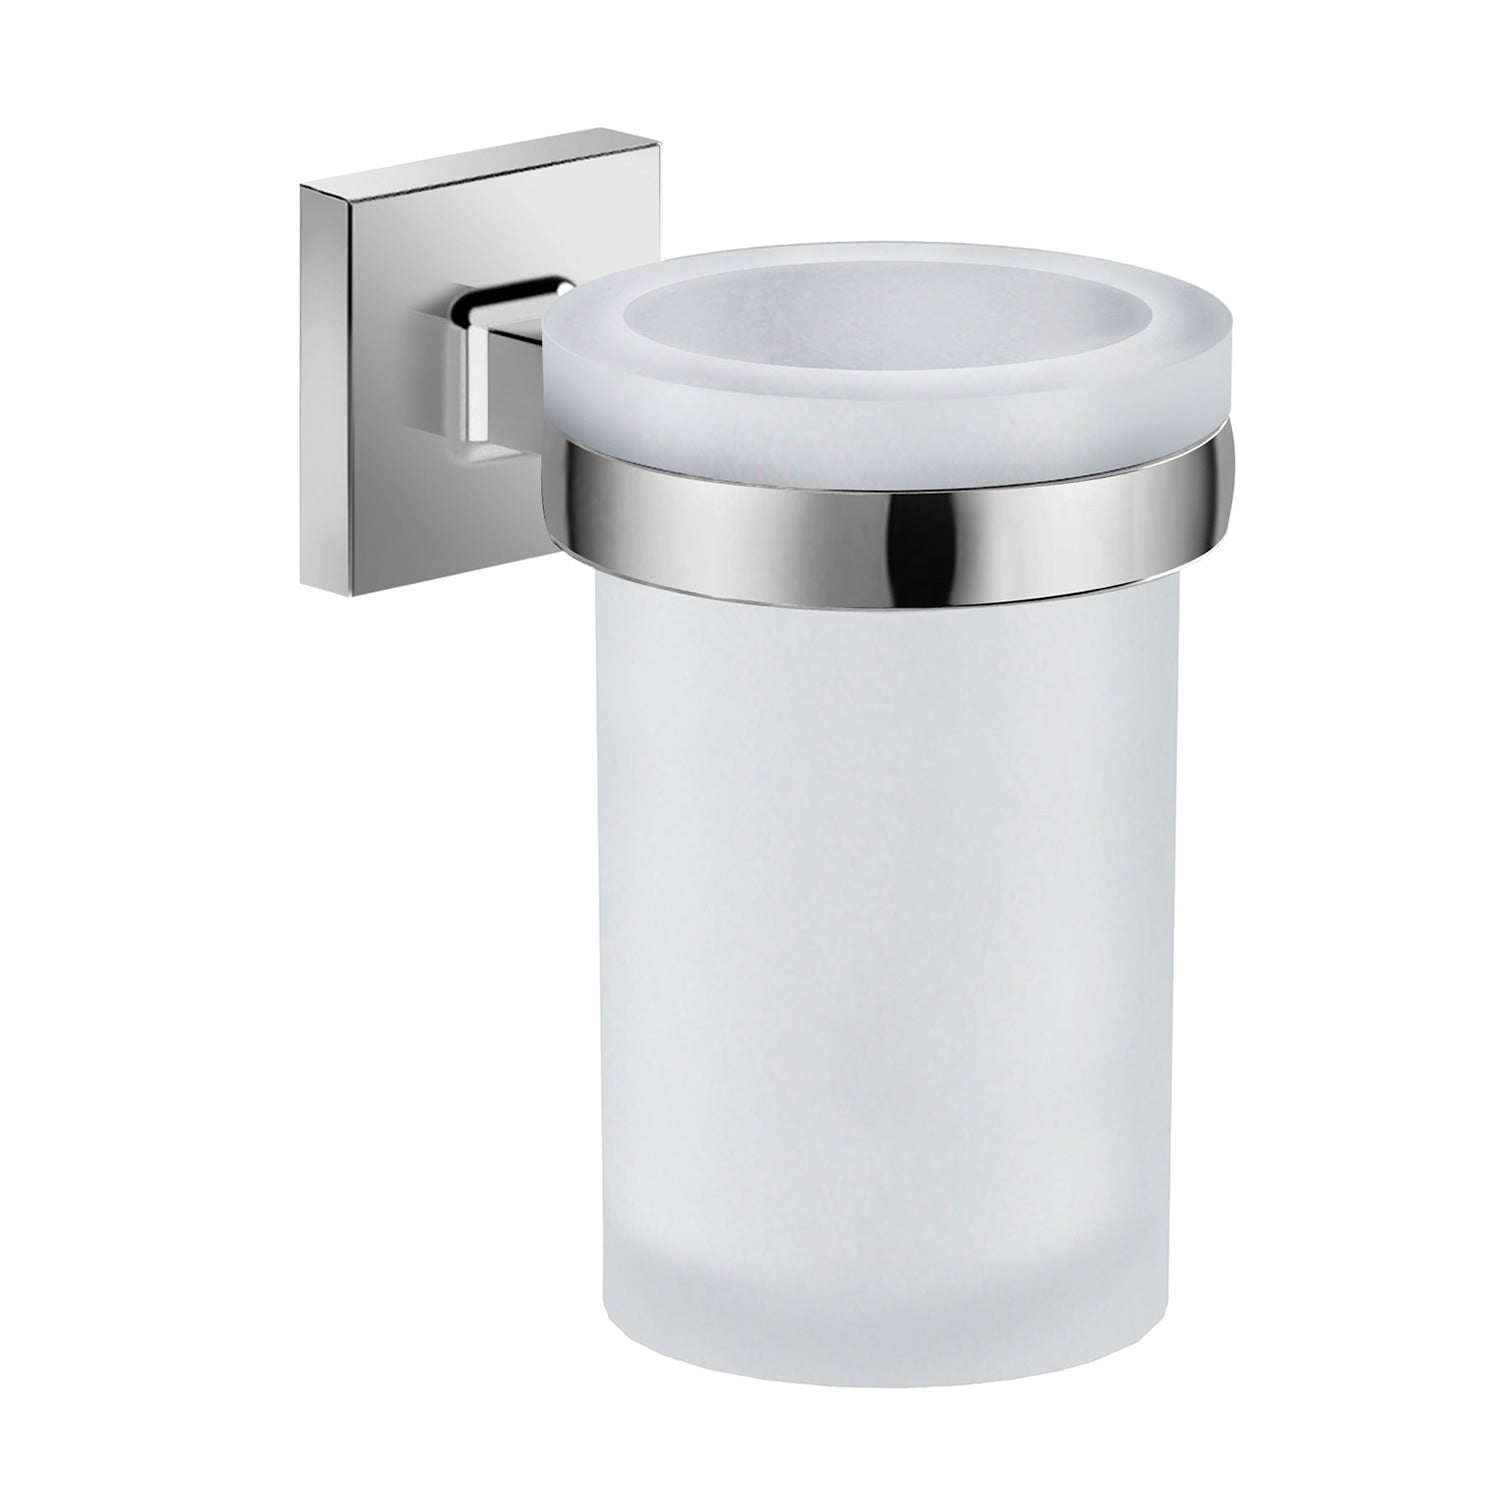 DAX Milano Bathroom Single Tumbler Toothbrush Holder, Wall Mount, Tempered Glass Cup, Brushed Finish, 2-15/16 x 4-3/4 x 4-5/16 Inches (DAX-GDC160152-BN)